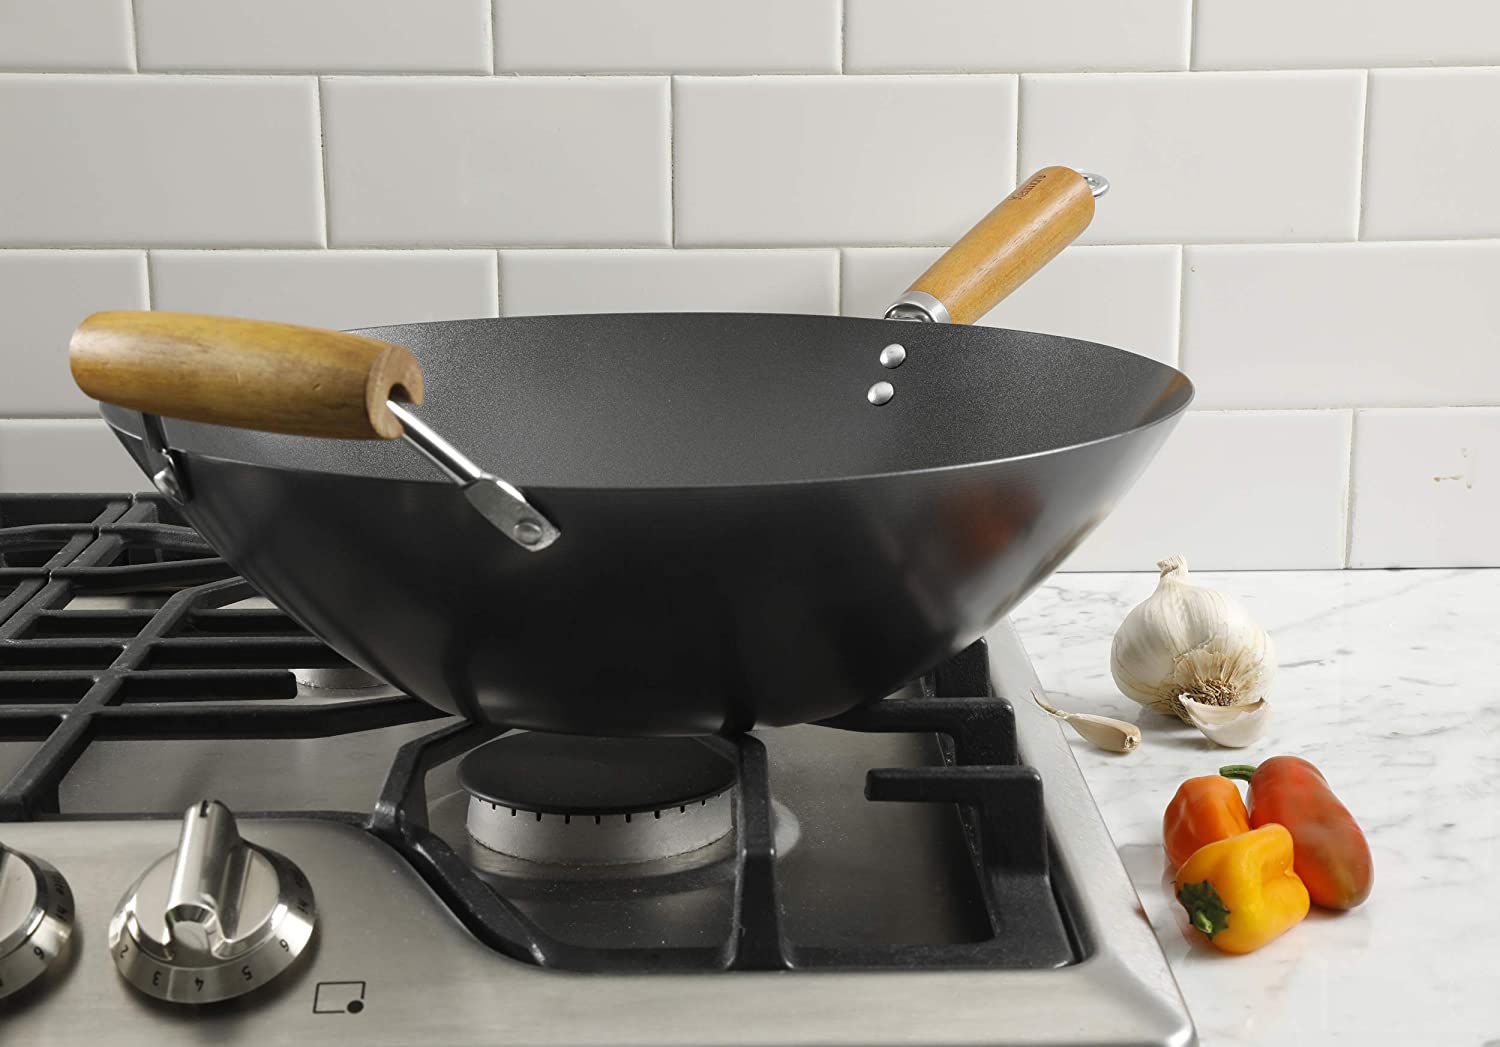 black wok on stove with wooden handles